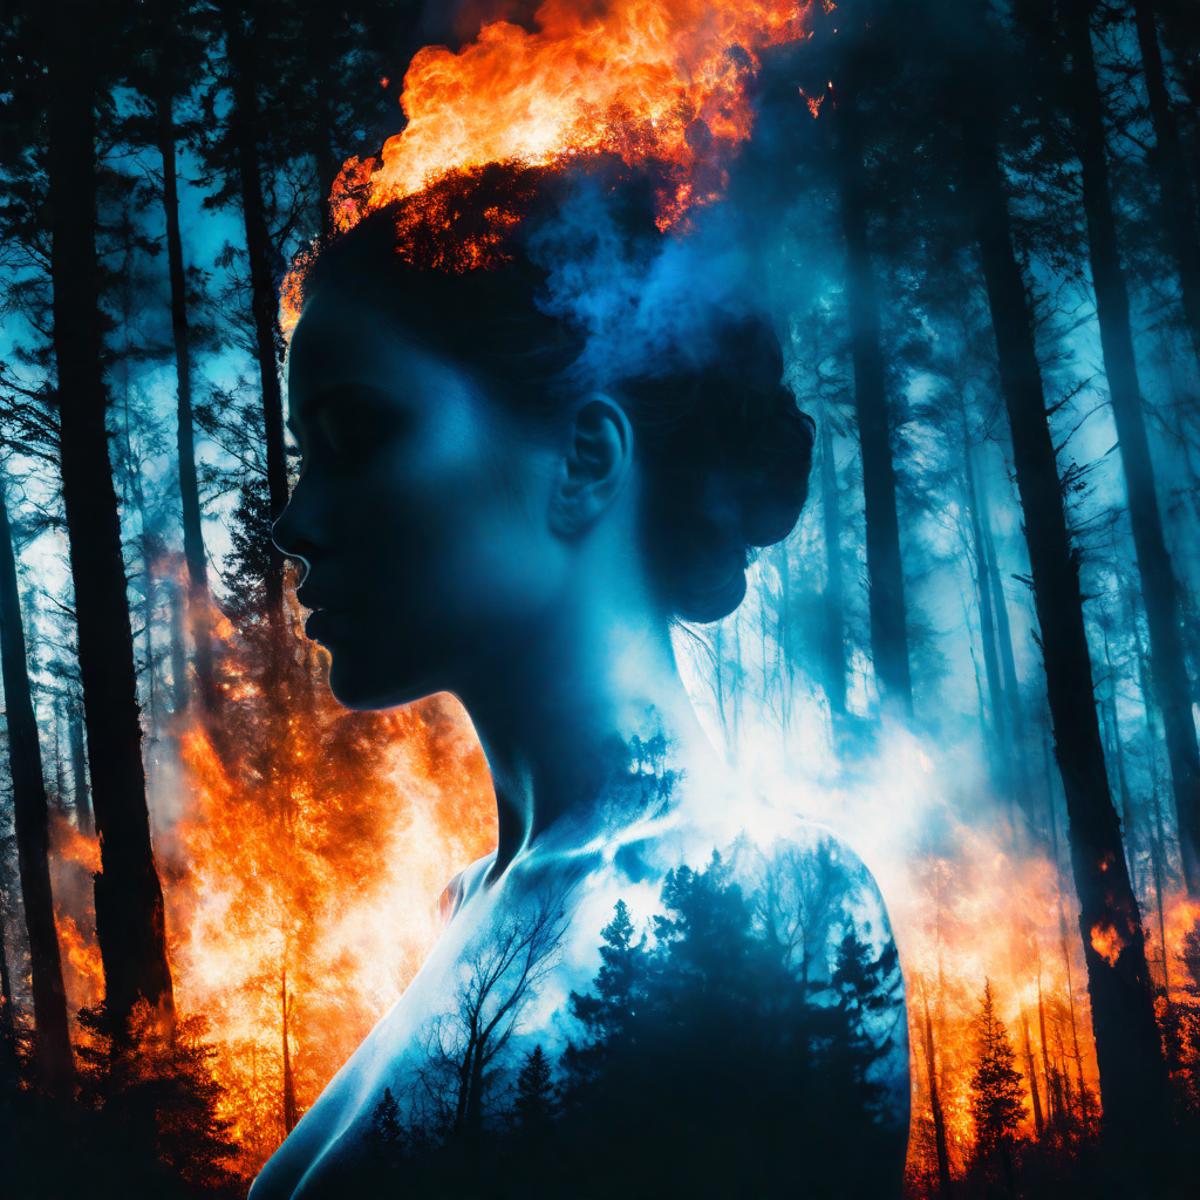 A woman with her hair up in a bun, surrounded by a forest with flames in the background.